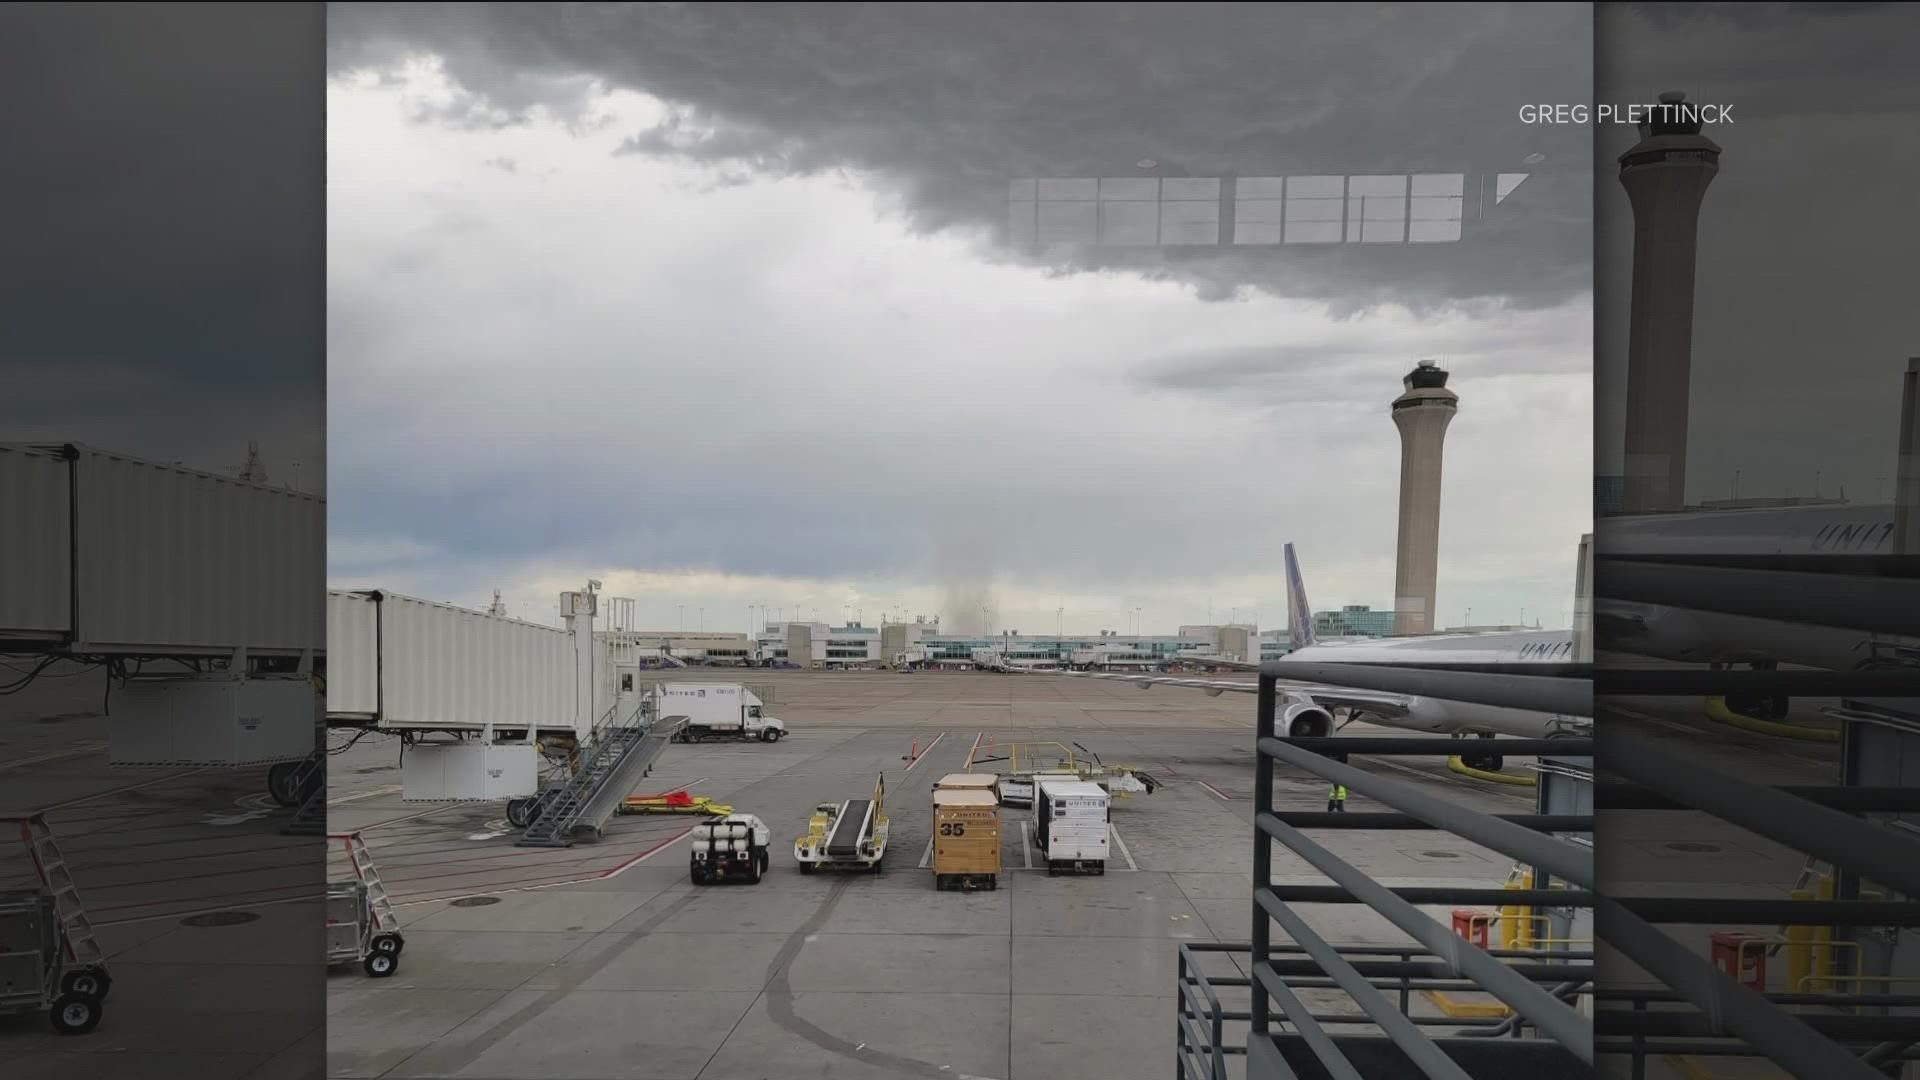 Denver Intl. Airport opened in 1995 in an area that now seems prone to tornadoes. The then-director of the New Airport Office said they researched that possibility.